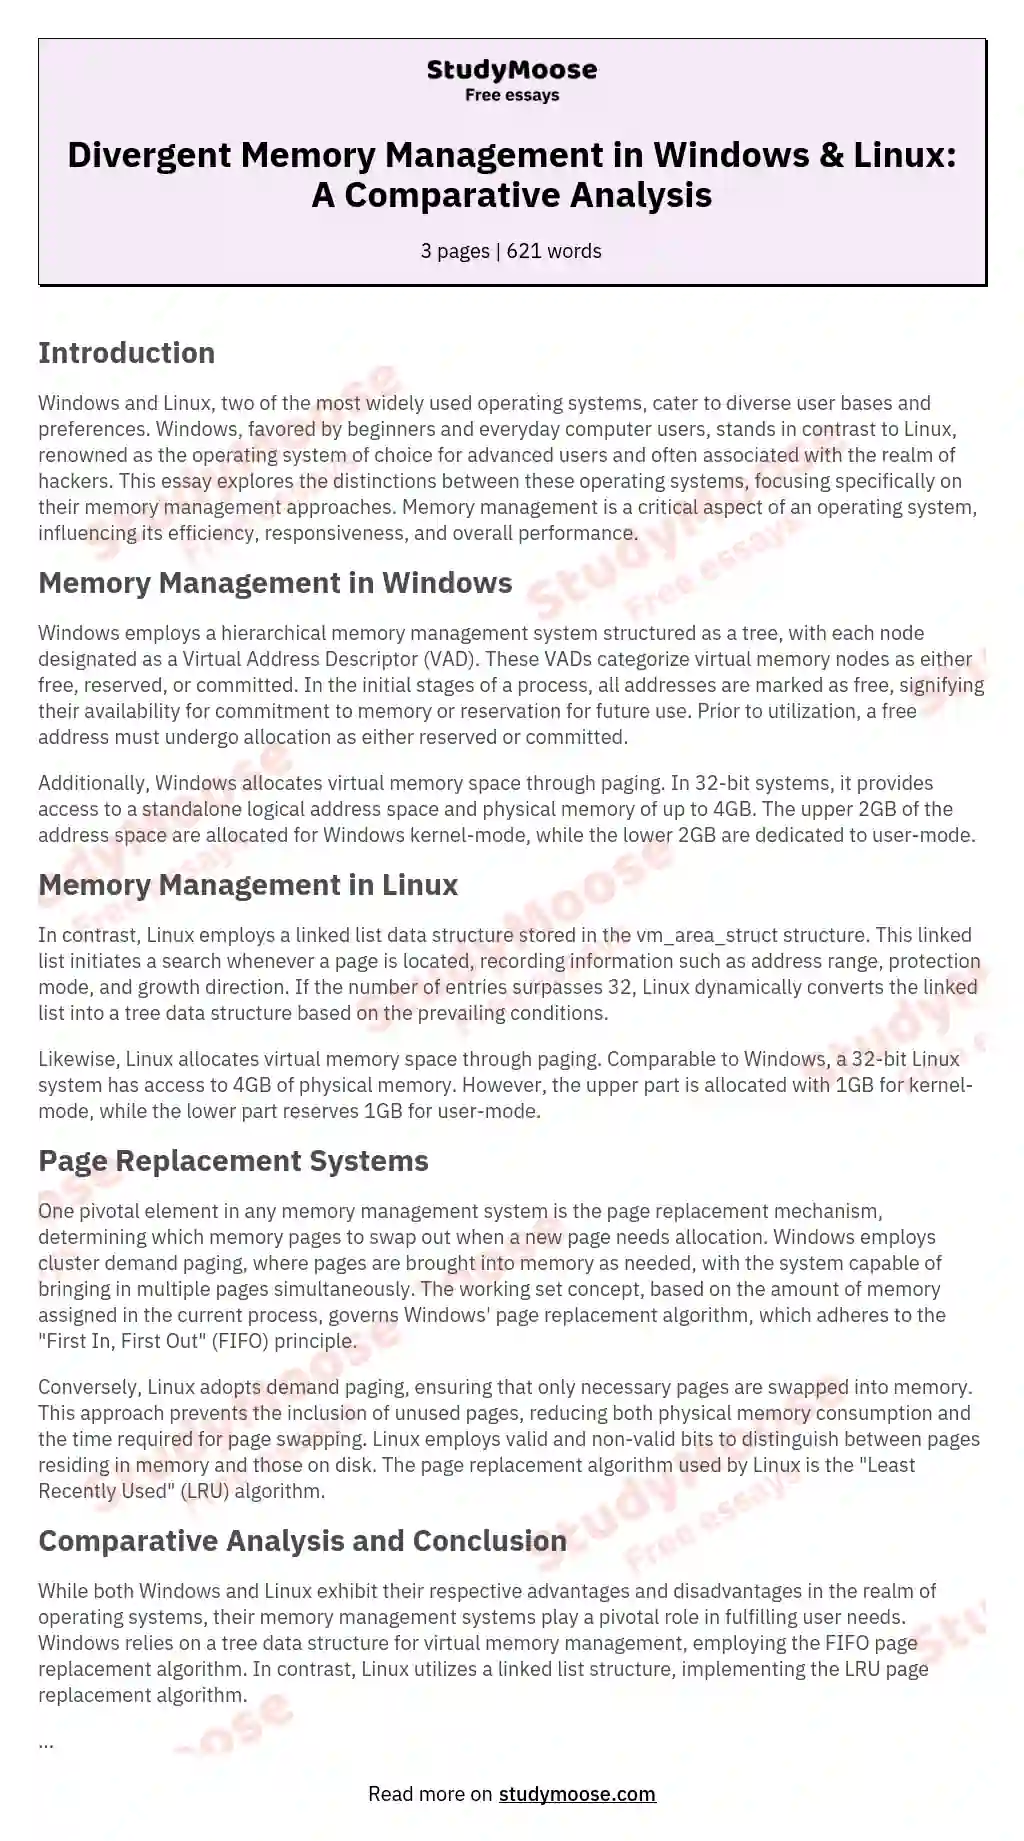 Divergent Memory Management in Windows & Linux: A Comparative Analysis essay